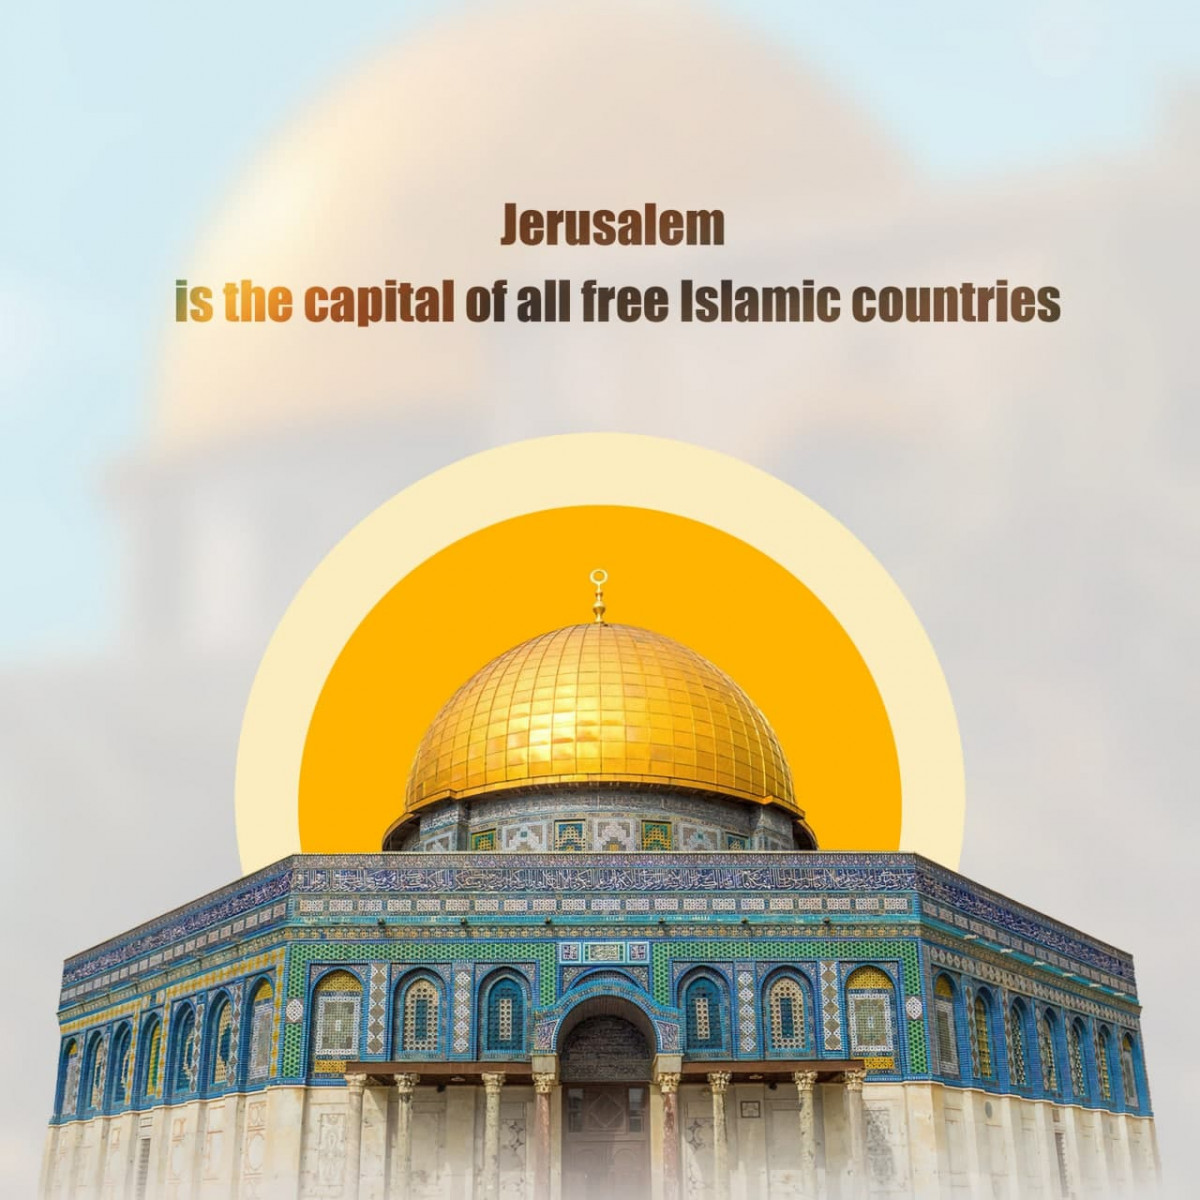 Jerusalem is the capital of all free Islamic countries